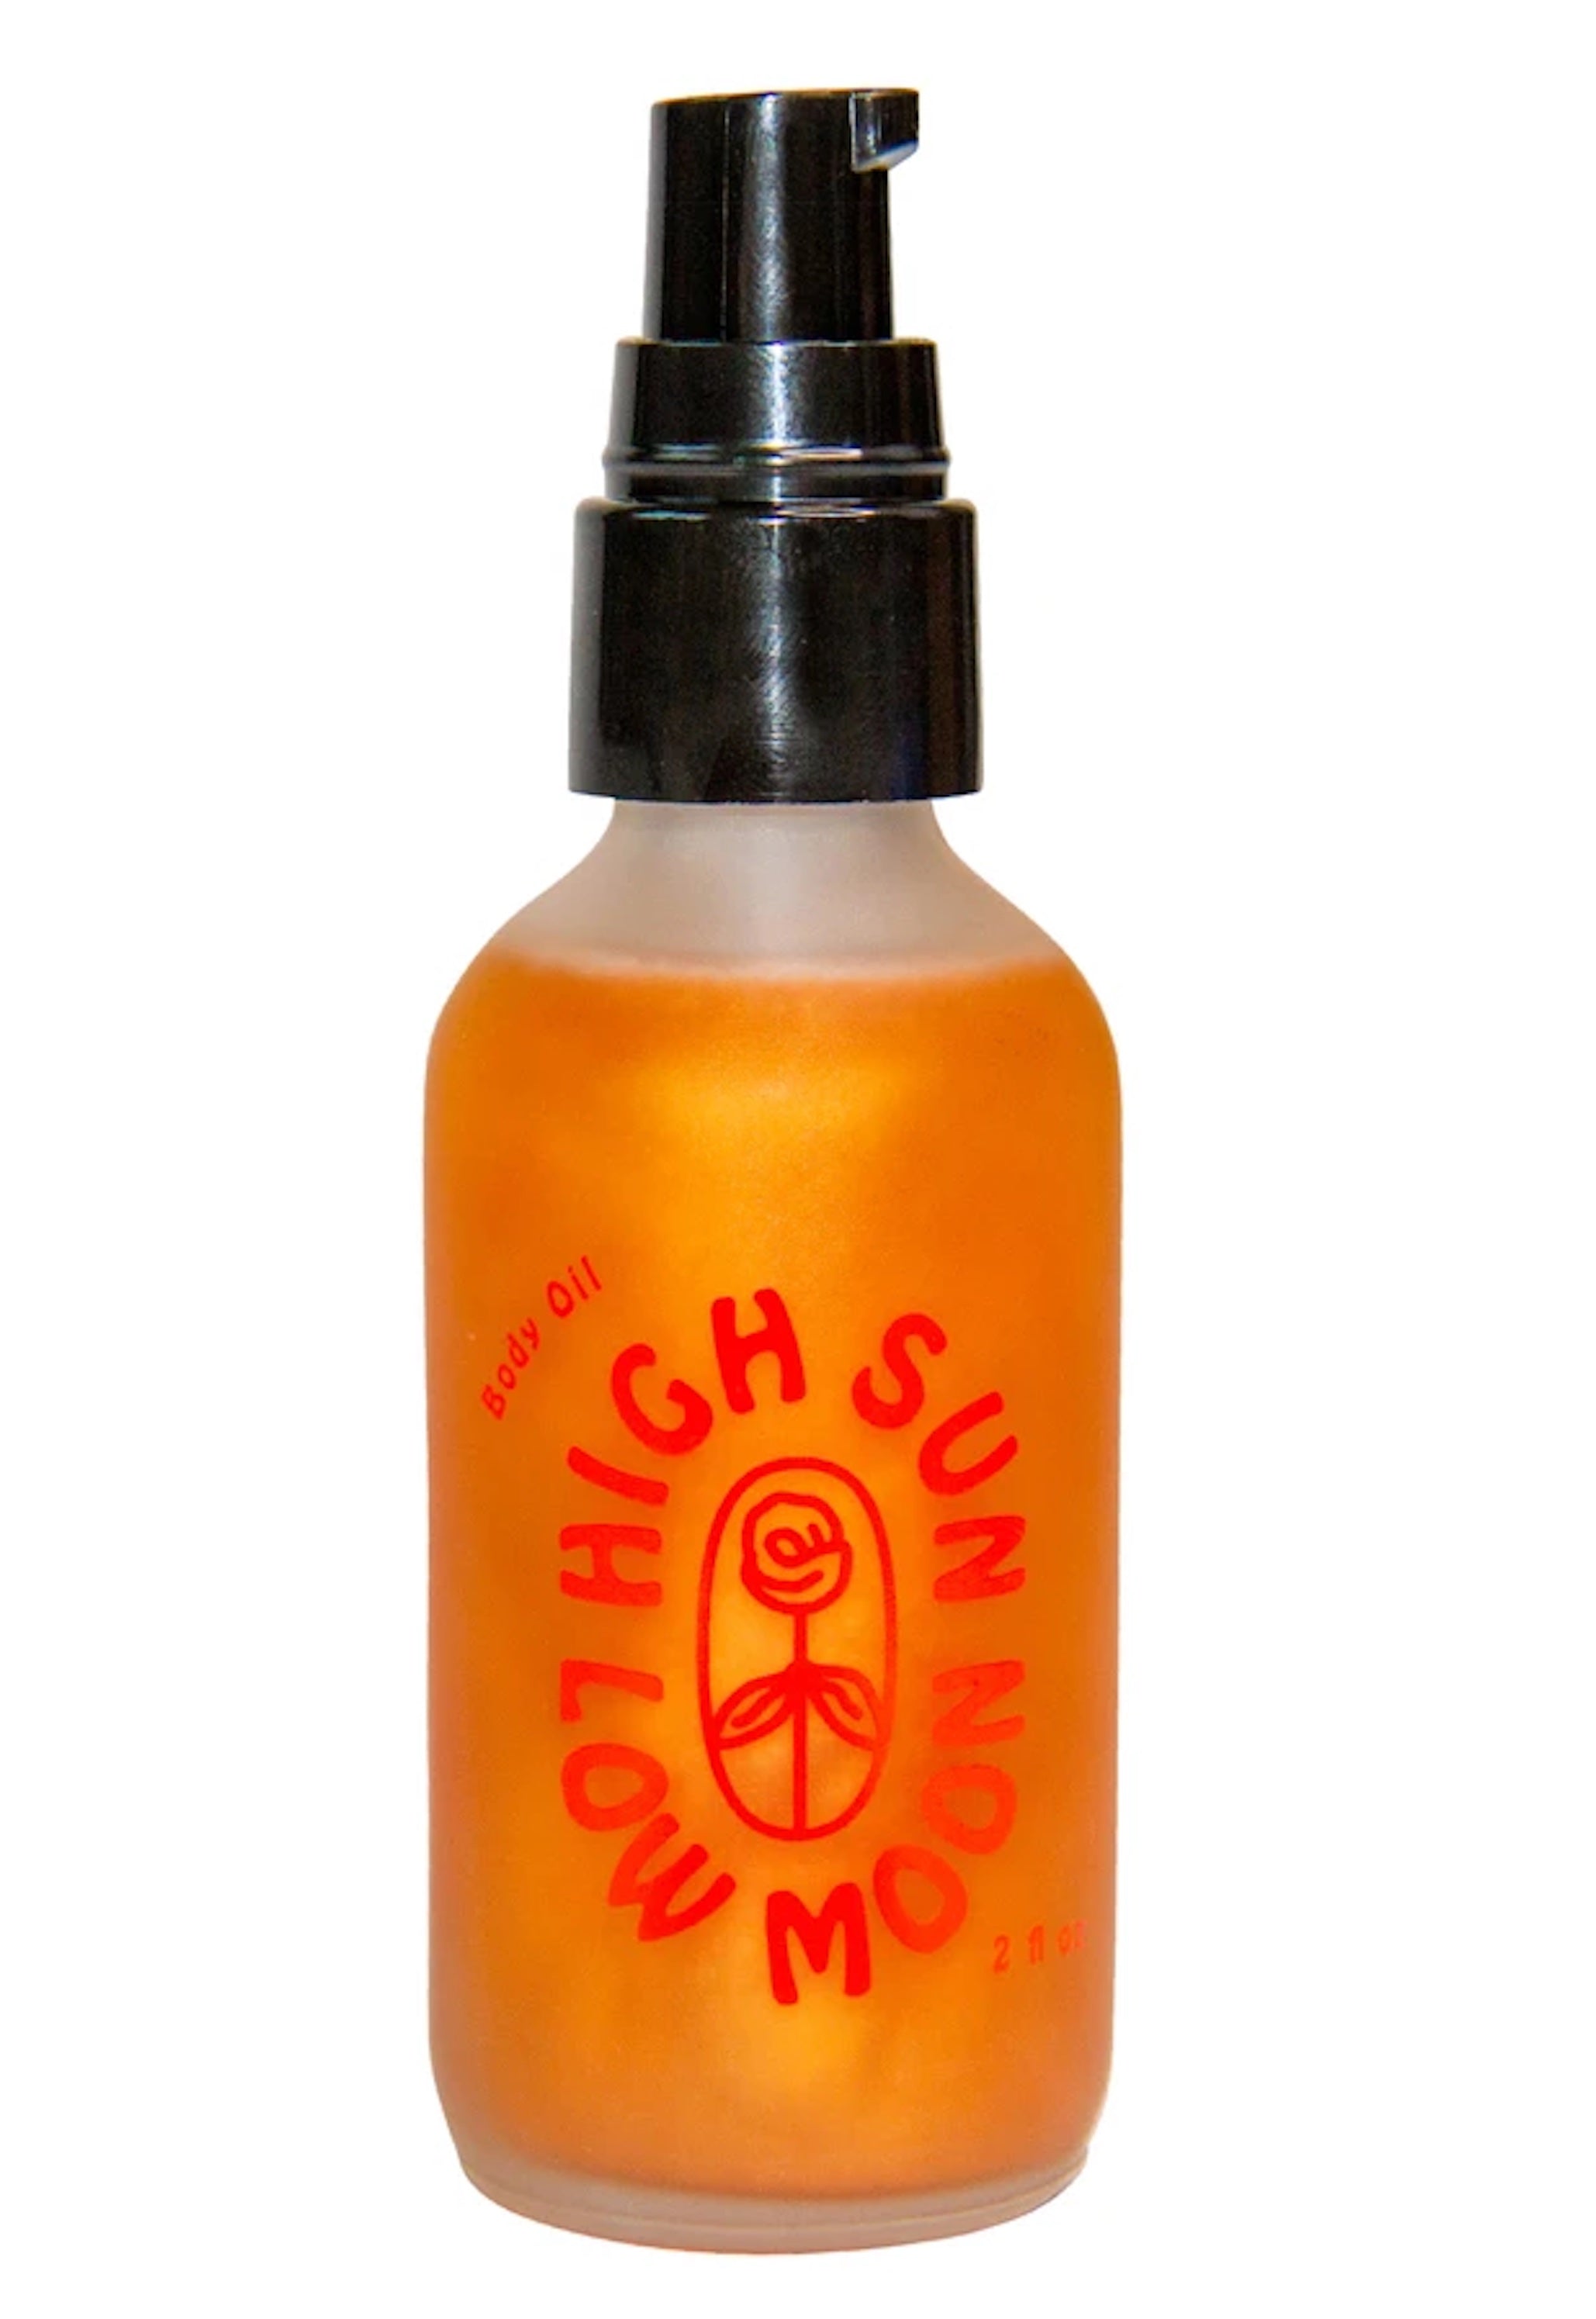 orange massage oil from high sun low moon depicted